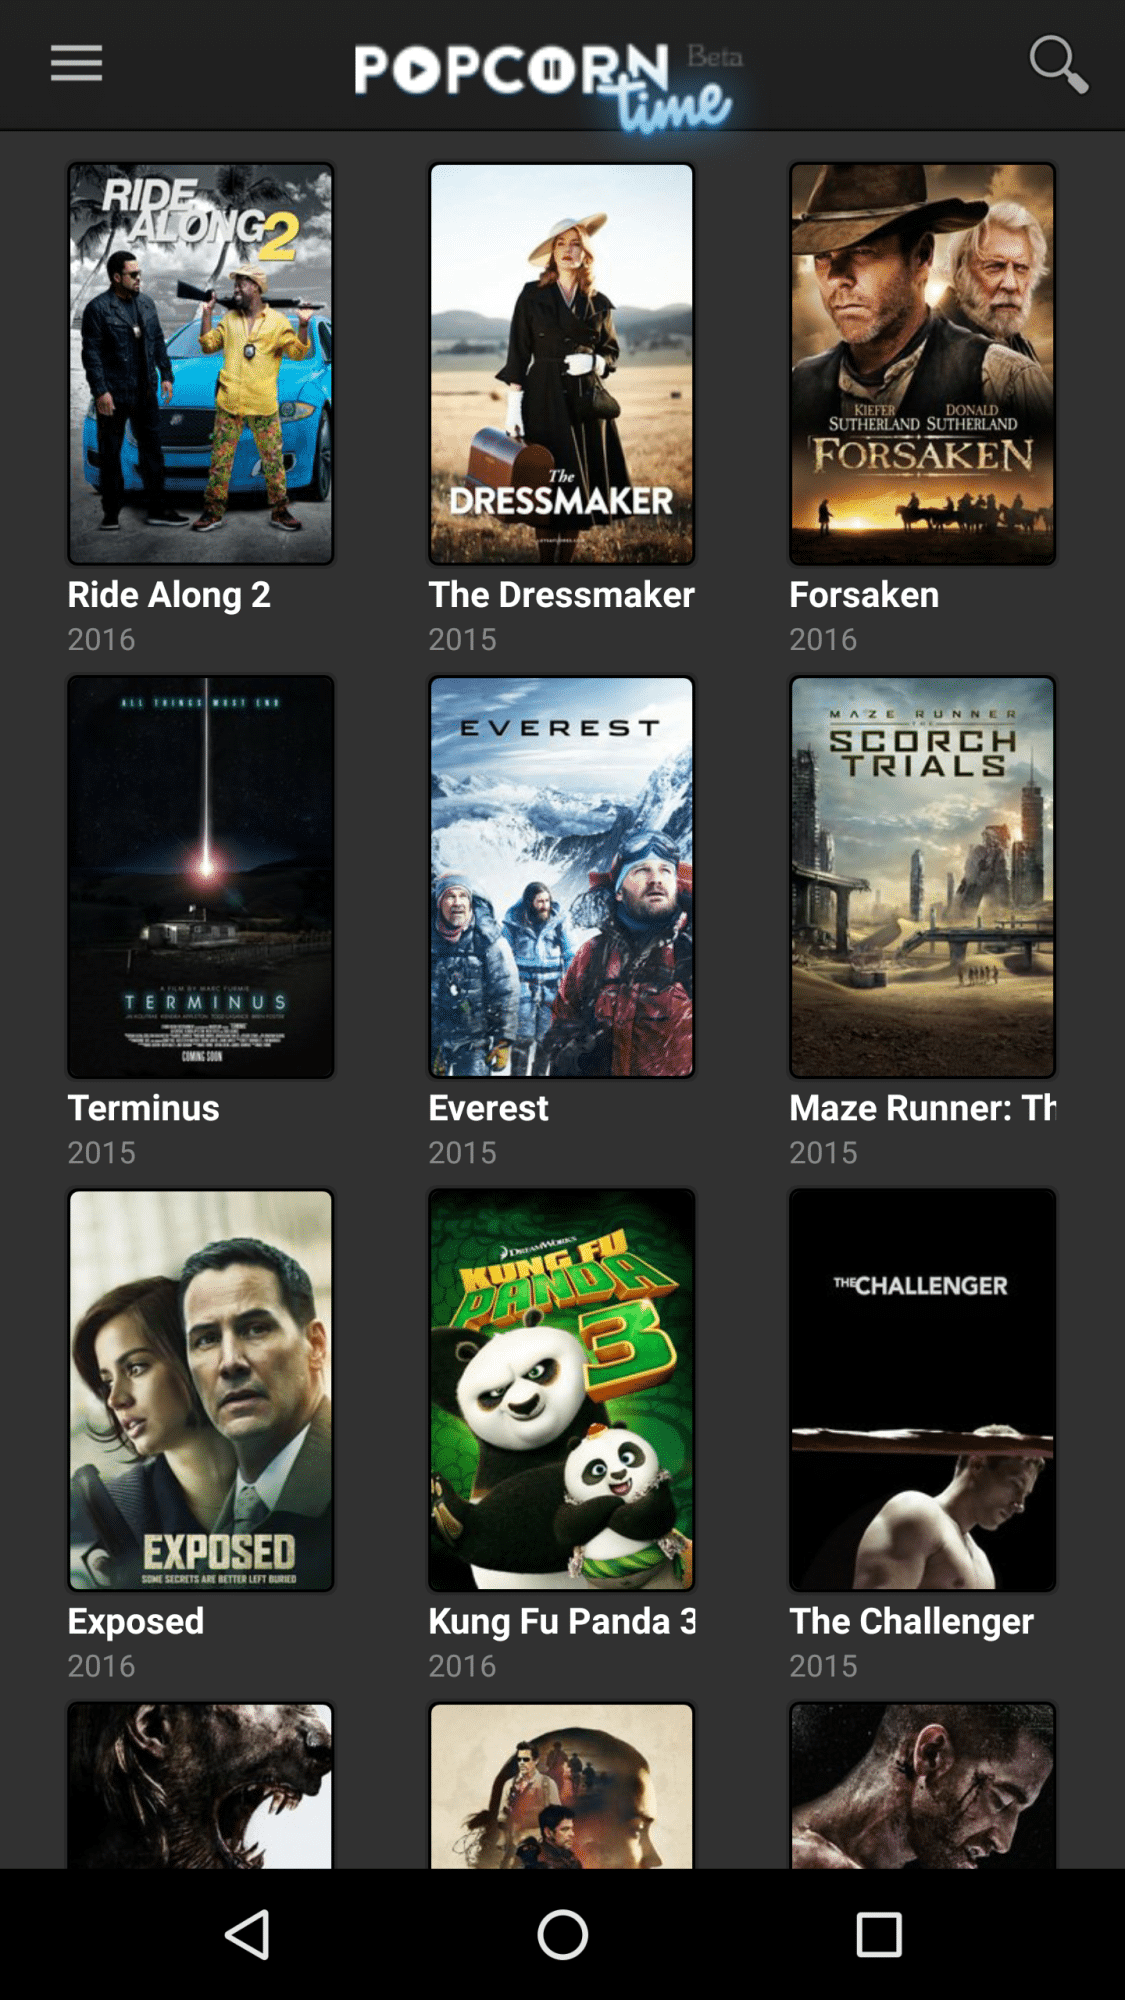 The Android app Popcorn Time looks like a normal streaming client, but shares copyrighted material via BitTorrent in the background.